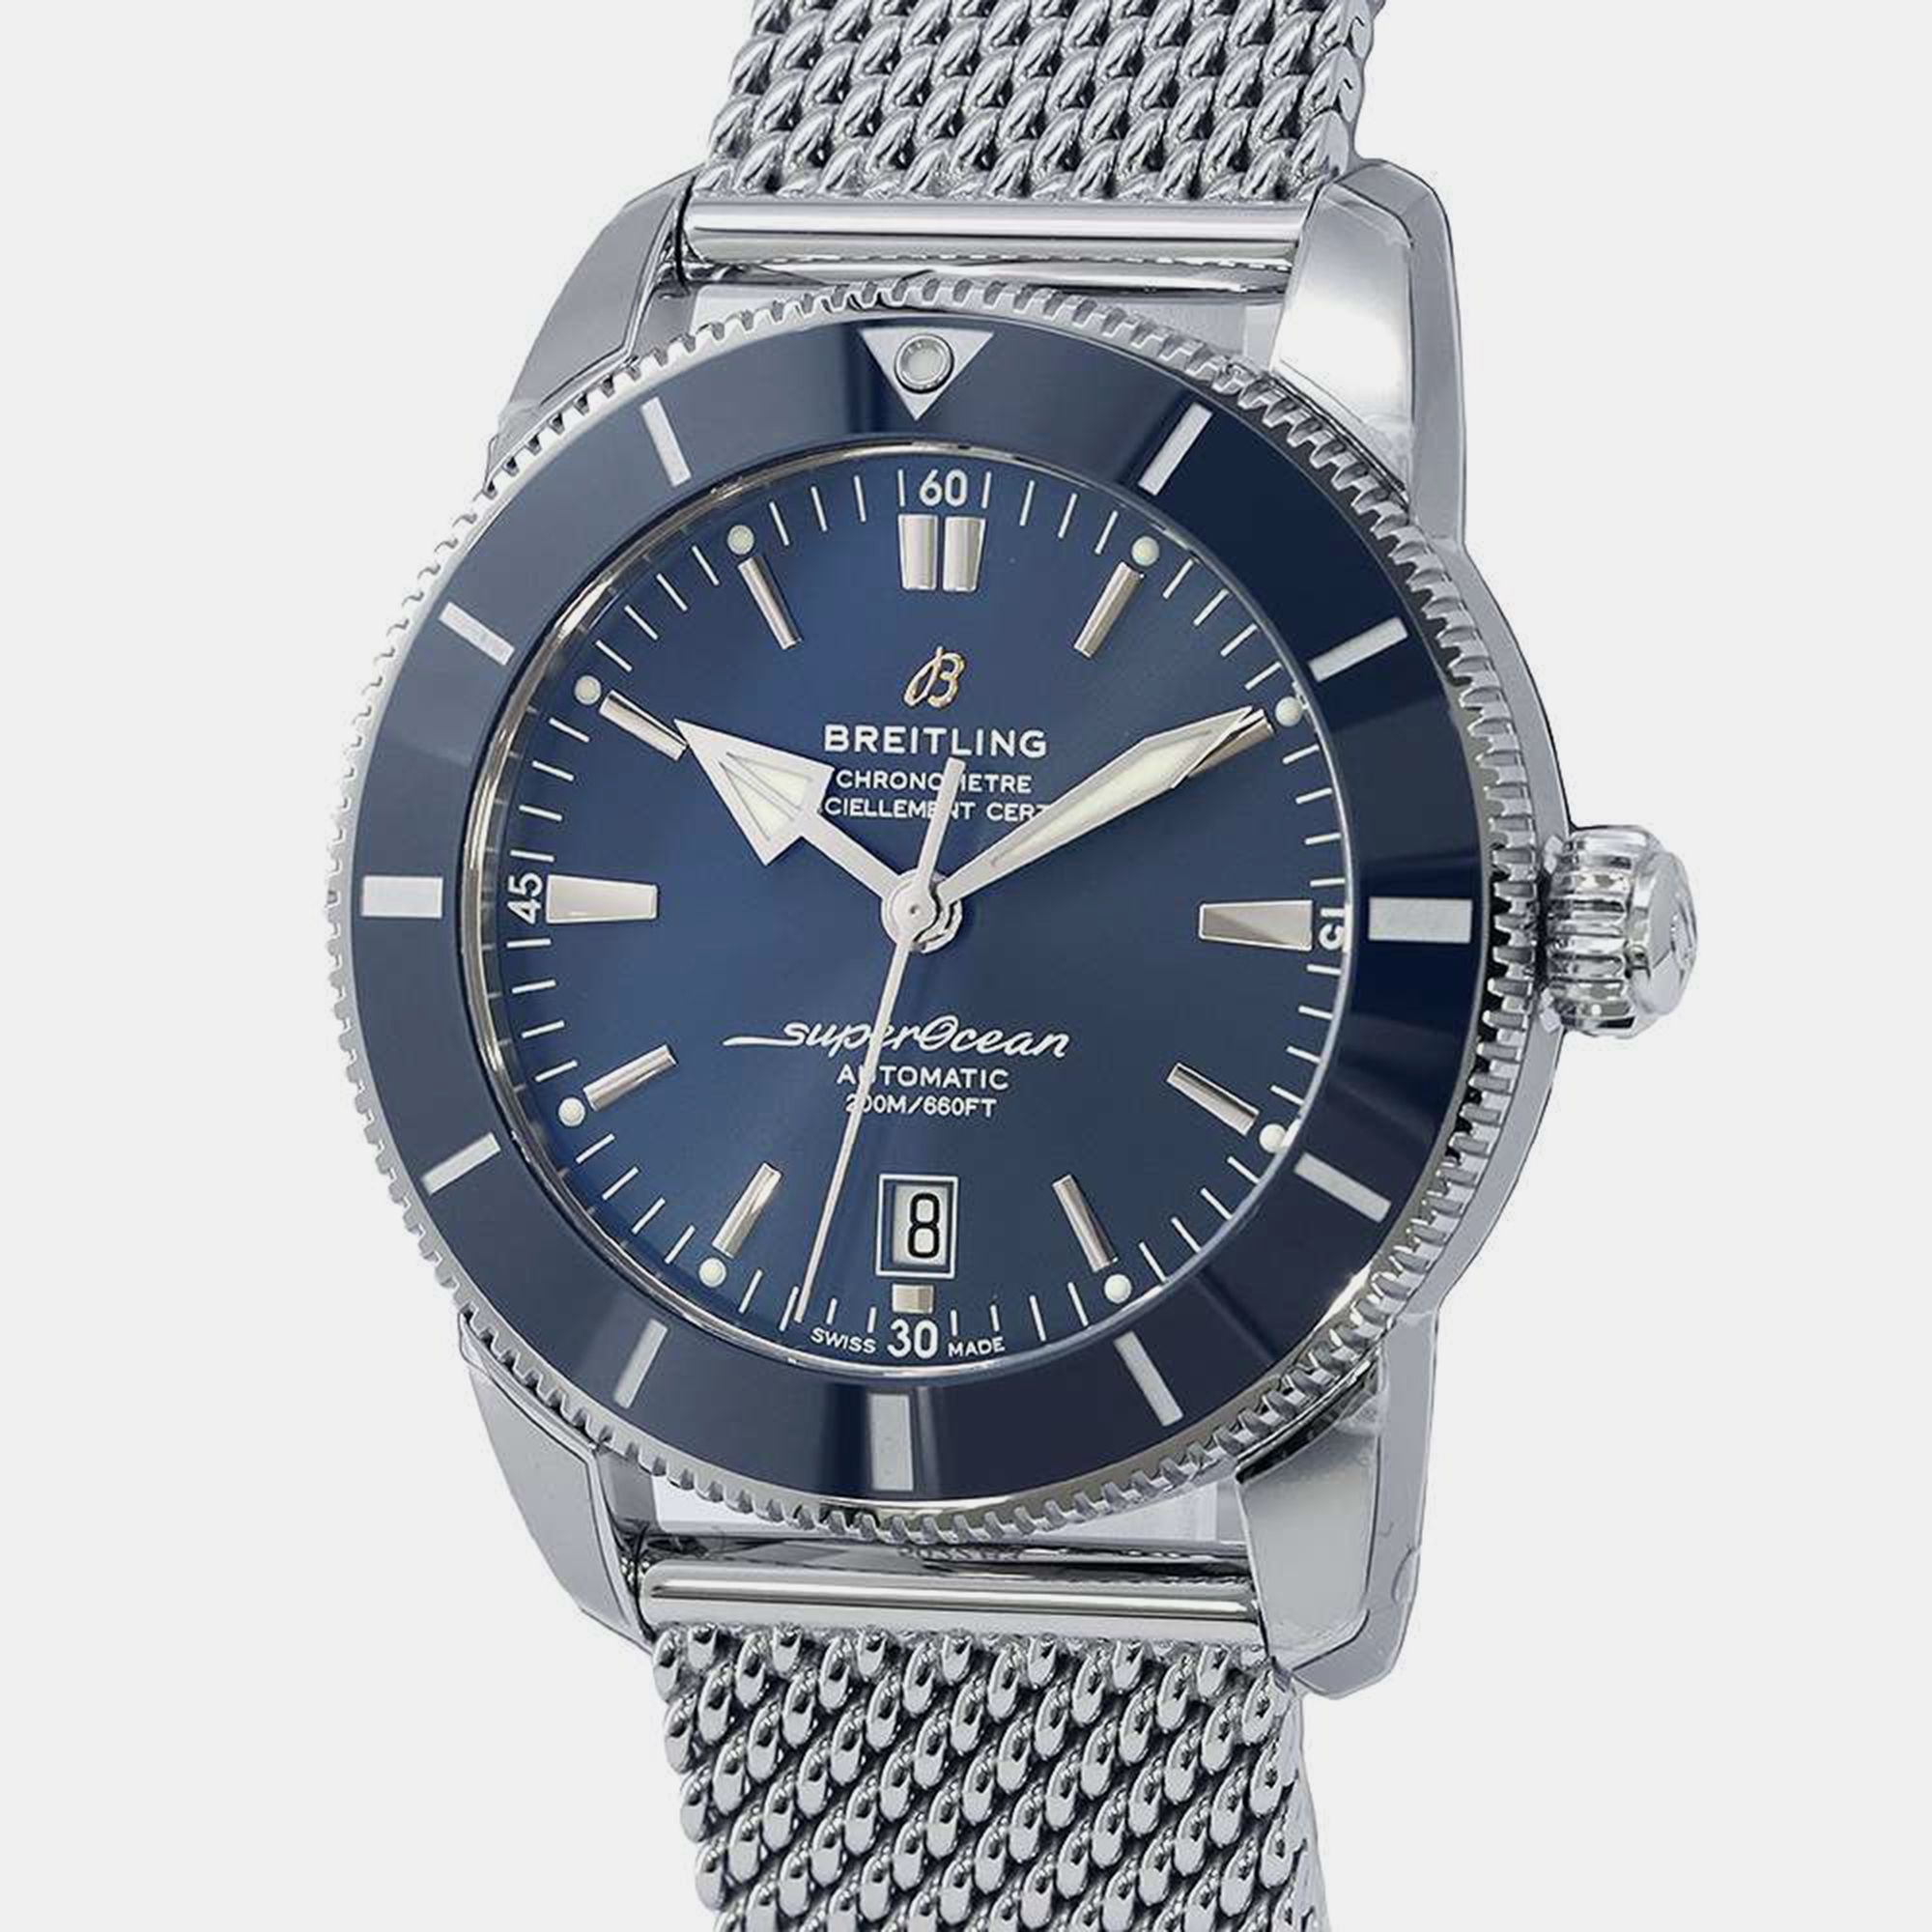 The charm of a finely crafted wristwatch accompanies the wearer through the years and to any occasion they have a date for. It is this charm infused with timeless luxury that makes this Breitling wristwatch such an incredible pick.